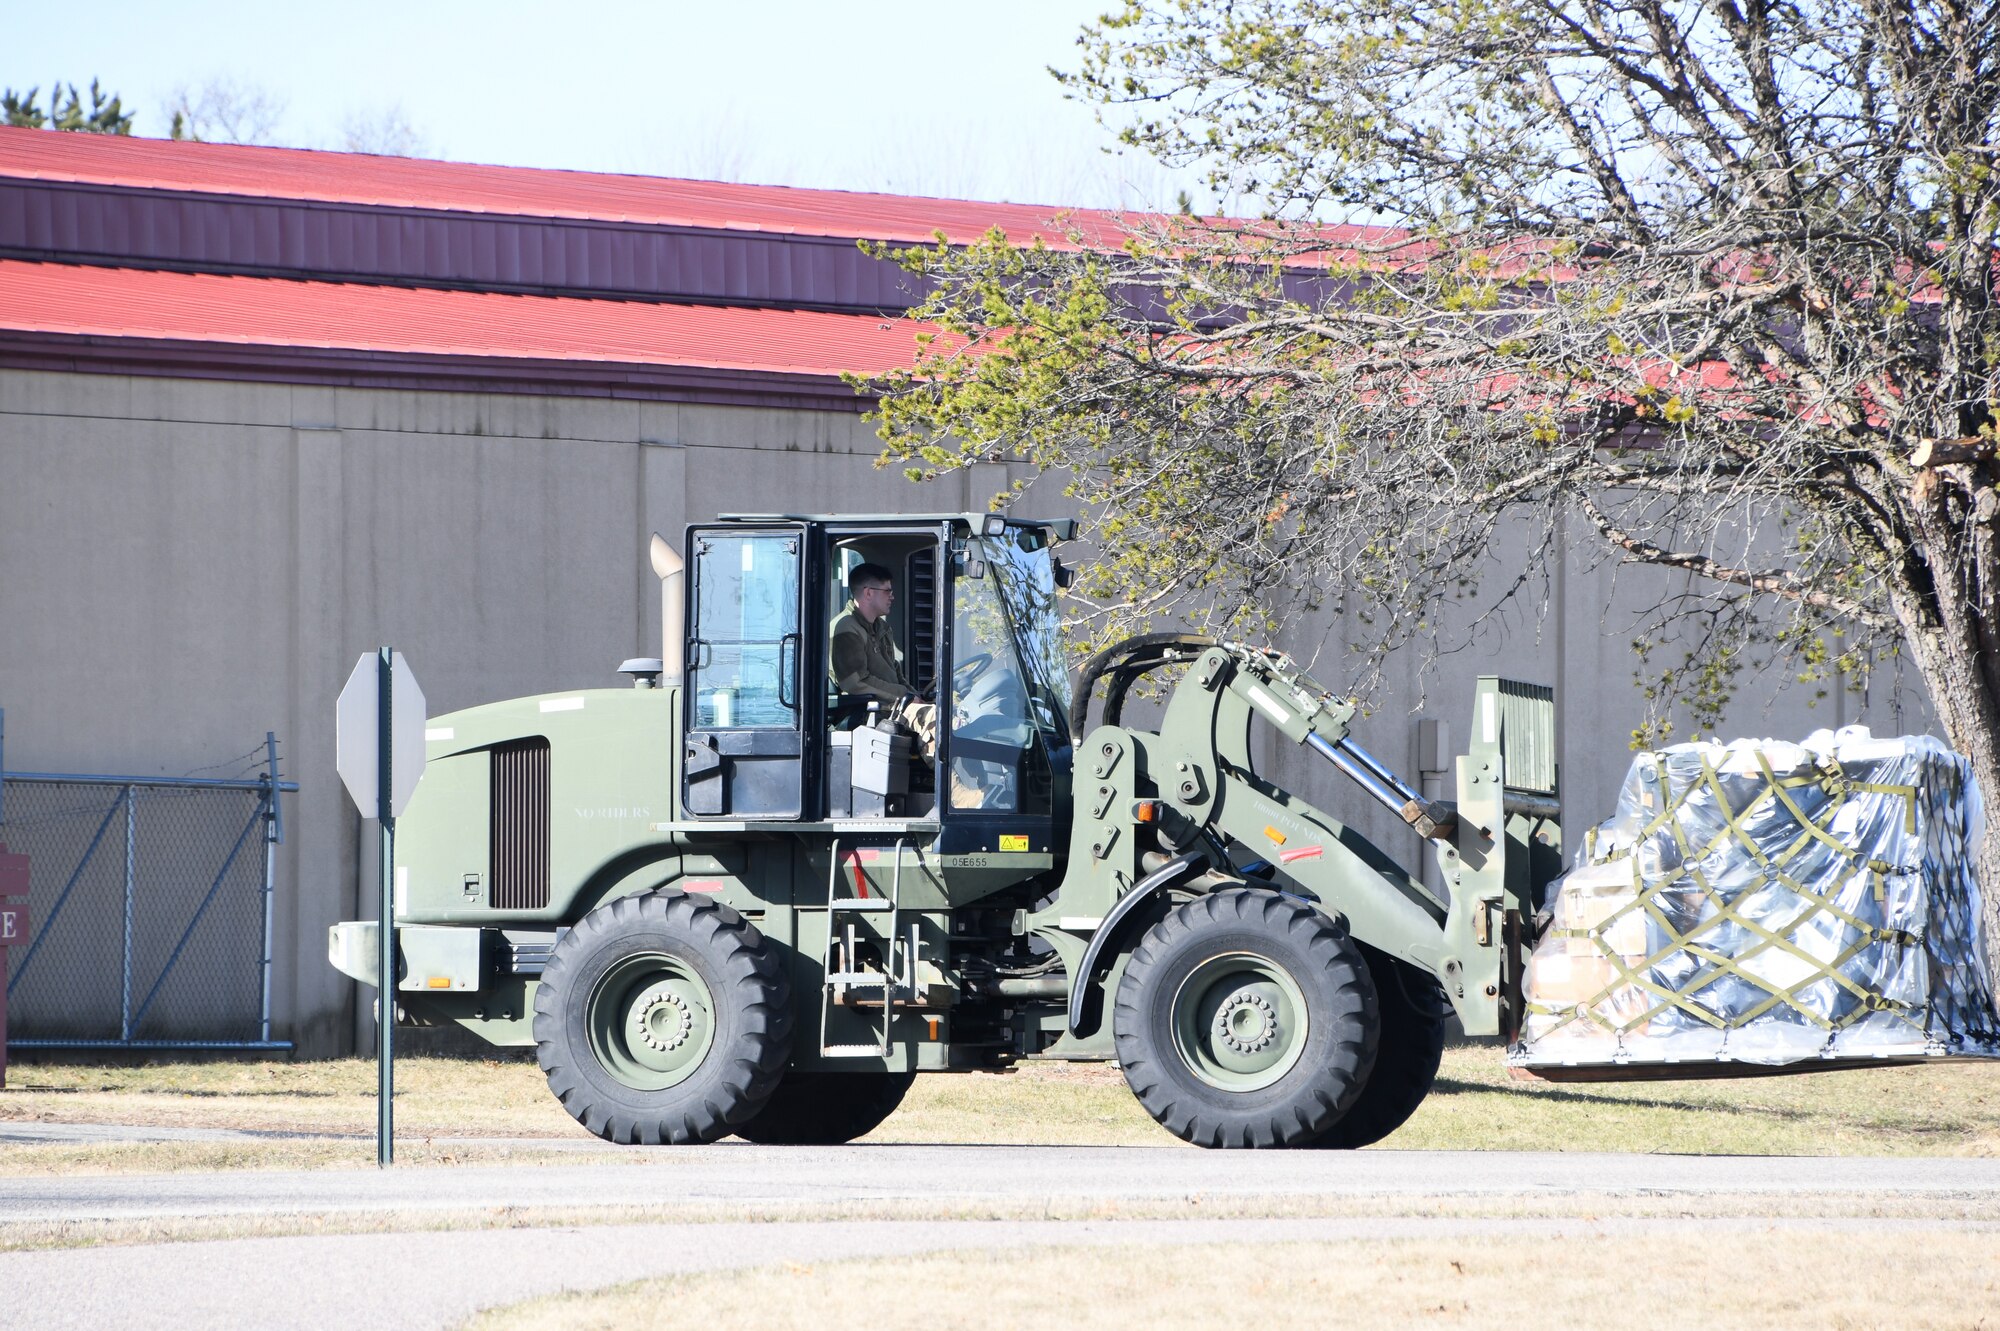 Airmen of the 168th Wing, Logistics Readiness Squadron, drive military forklifts while in charge of cargo movement during a multi-day readiness exercise at Volk Field, Wisconsin, April 1-7, 2023. The multi-day flyaway readiness exercise focused on the Department of the Air Force’s priority of Agile Combat Employment, which uses multi-capable Airmen to increase operational resiliency and survivability while generating combat air power. (U.S. Air National Guard photo by Senior Master Sgt. Julie Avey)